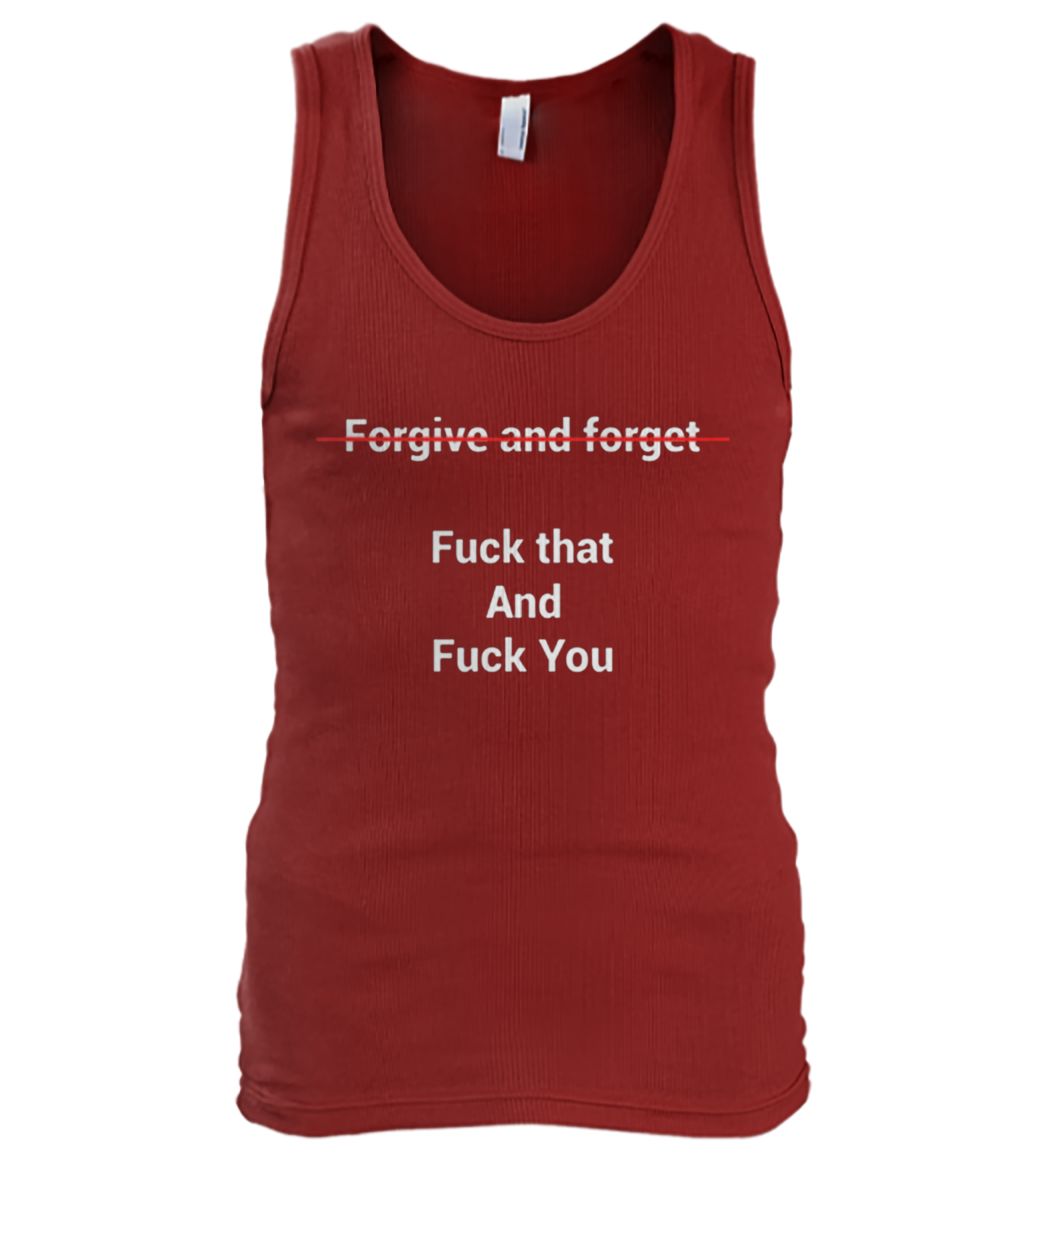 Forgive and forget fuck that and fuck you men's tank top